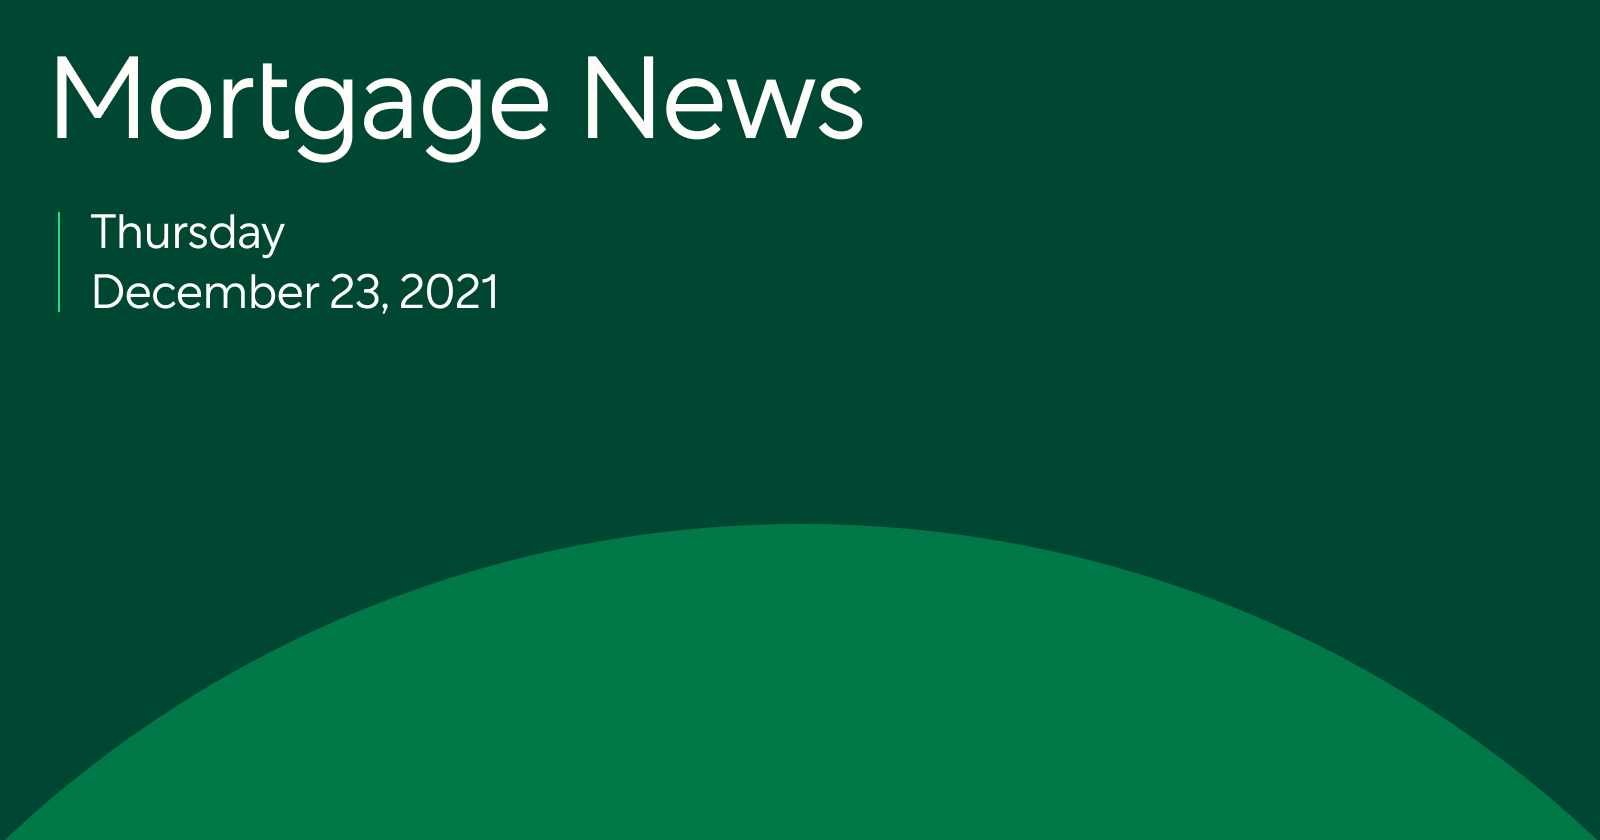 Mortgage News: Here’s What To Expect On The Market In 2022